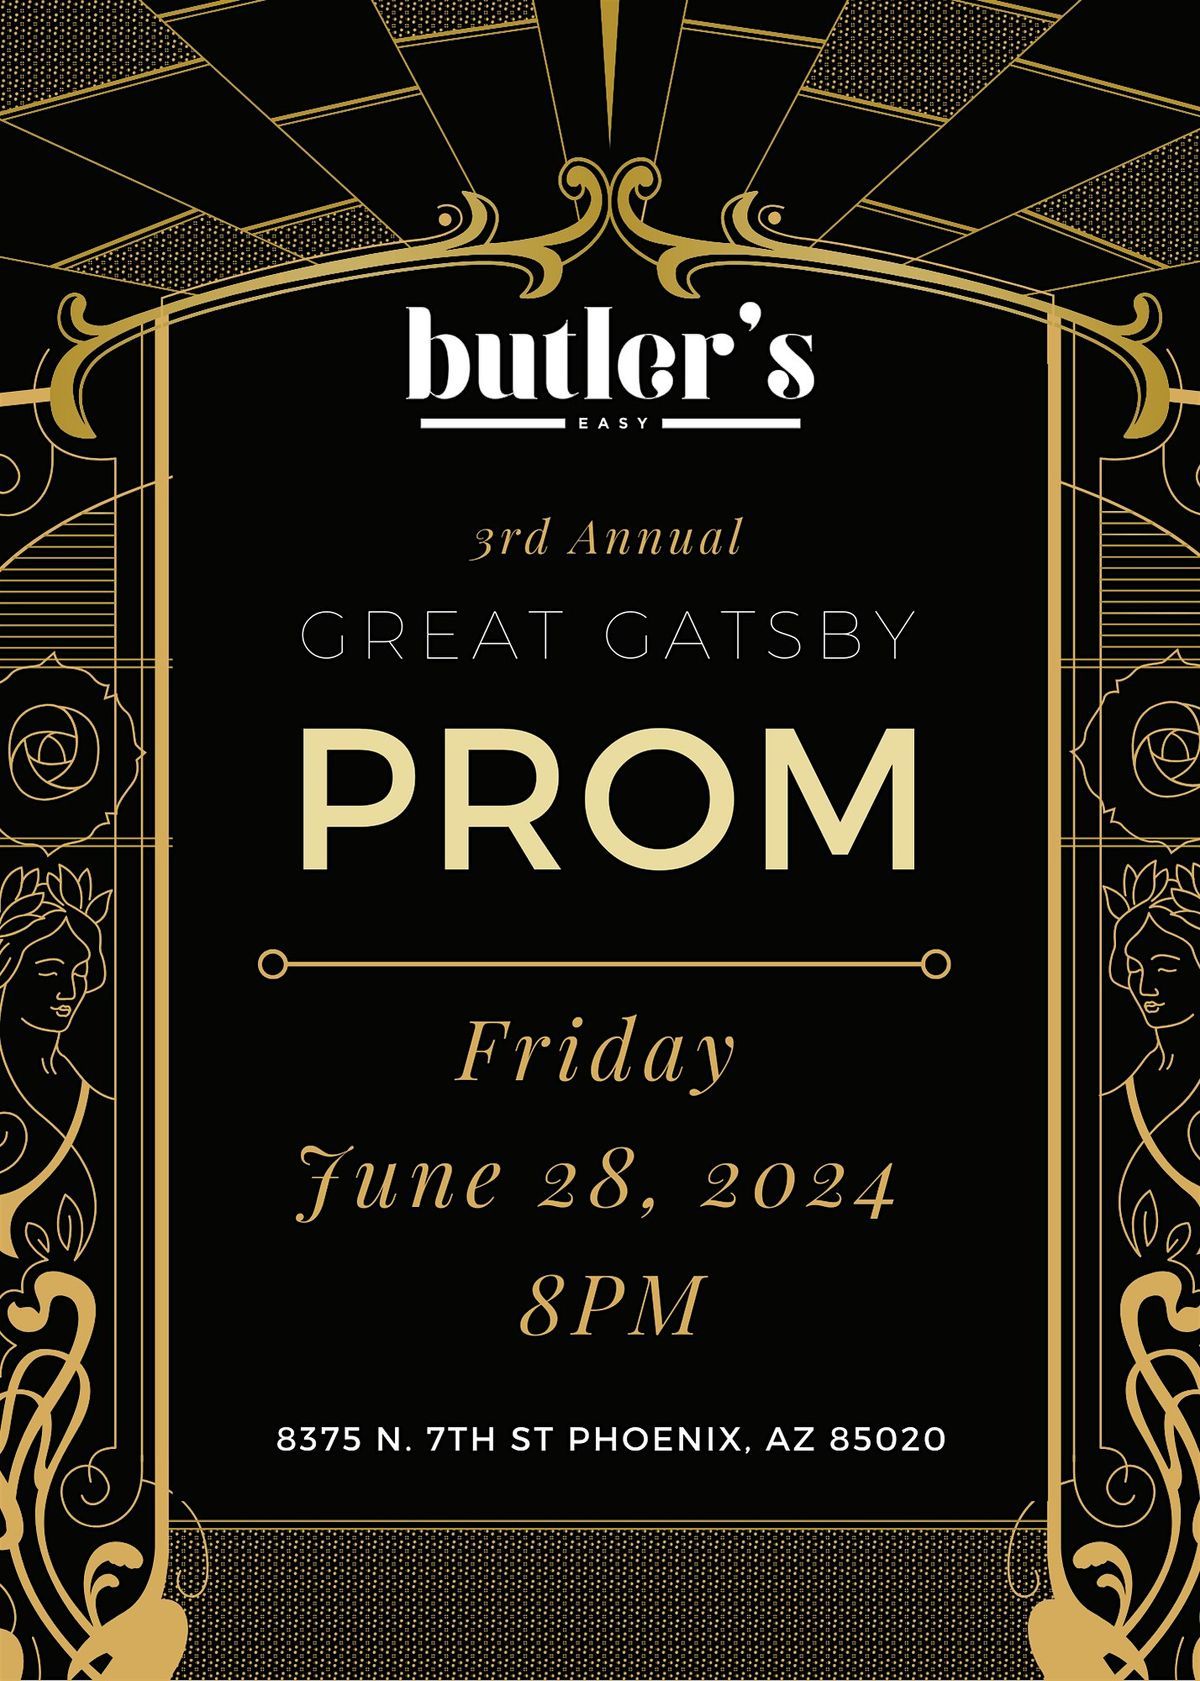 Great Gatsby Prom at Butler's Easy